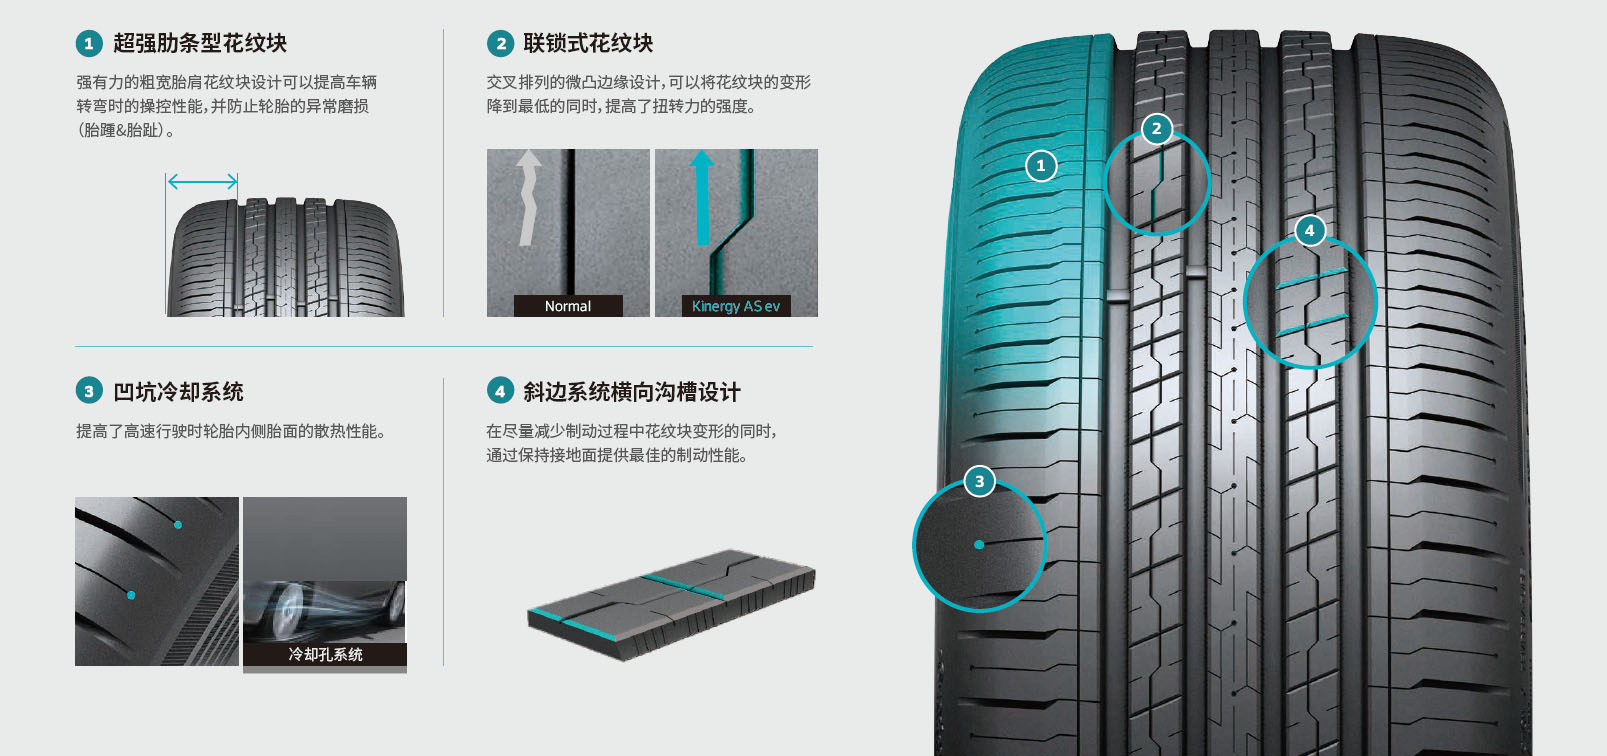 Hankook Tire & Technology-Technology in Motion-EV Tires, Standing at the inflection Point-5